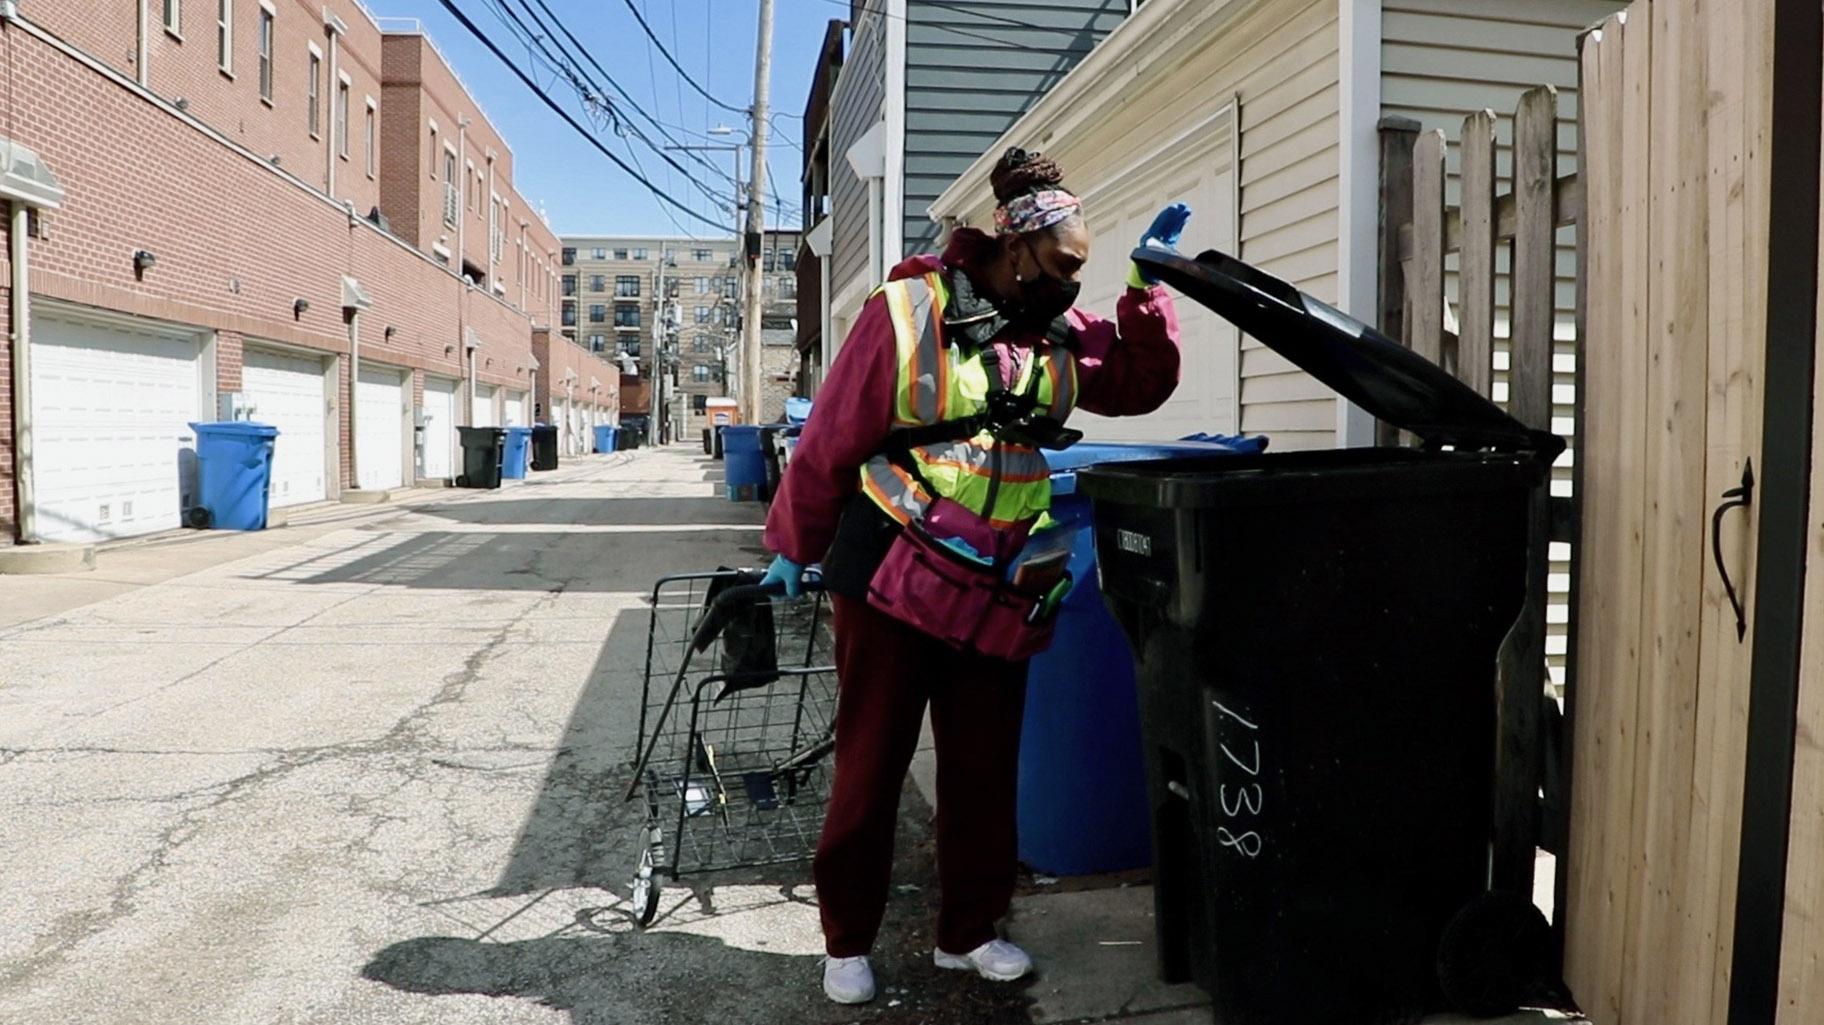 Angel Williams looks through a garbage can in Chicago’s Roscoe Village neighborhood on April 1, 2022. In 2021, Williams wrote and published a book on her entrepreneurial journey as a dumpster diver. (Evan Garcia / WTTW News)